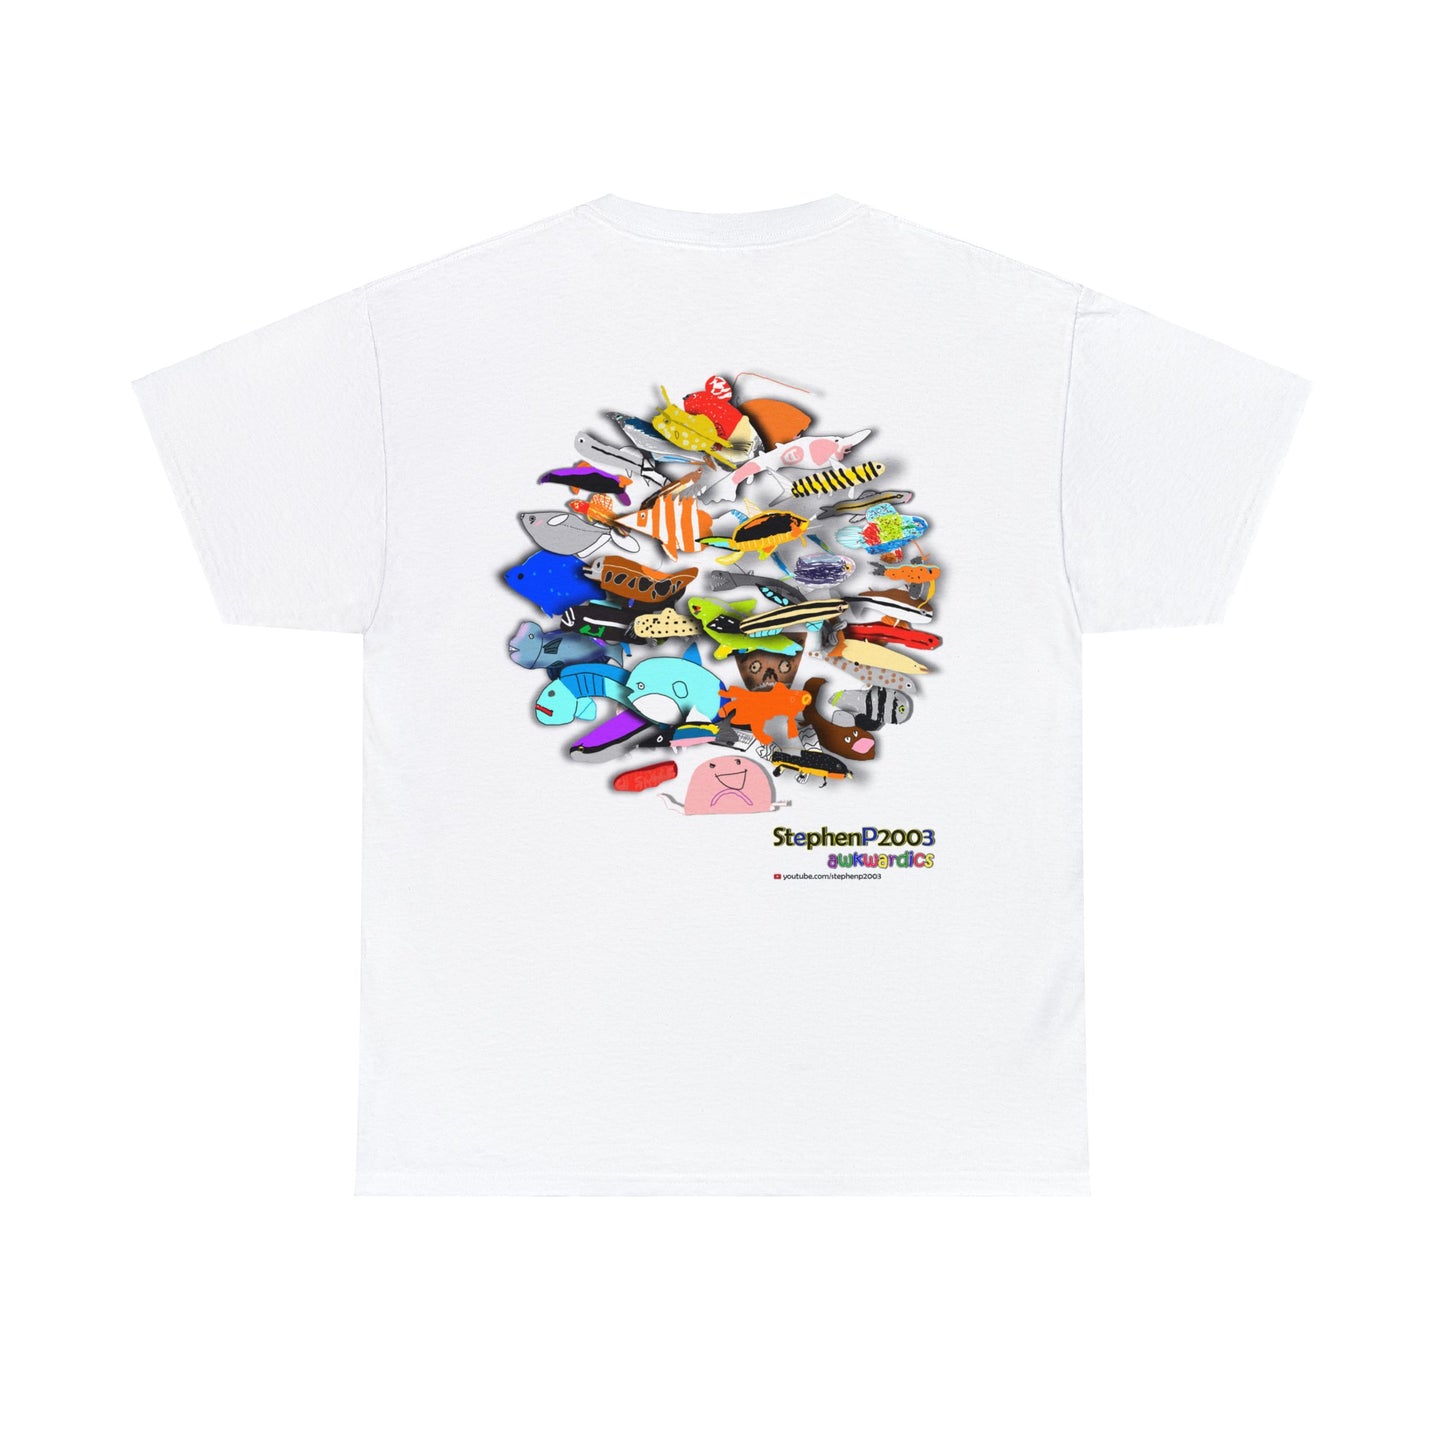 T-Shirt - ORIGINAL What the Fish First Edition